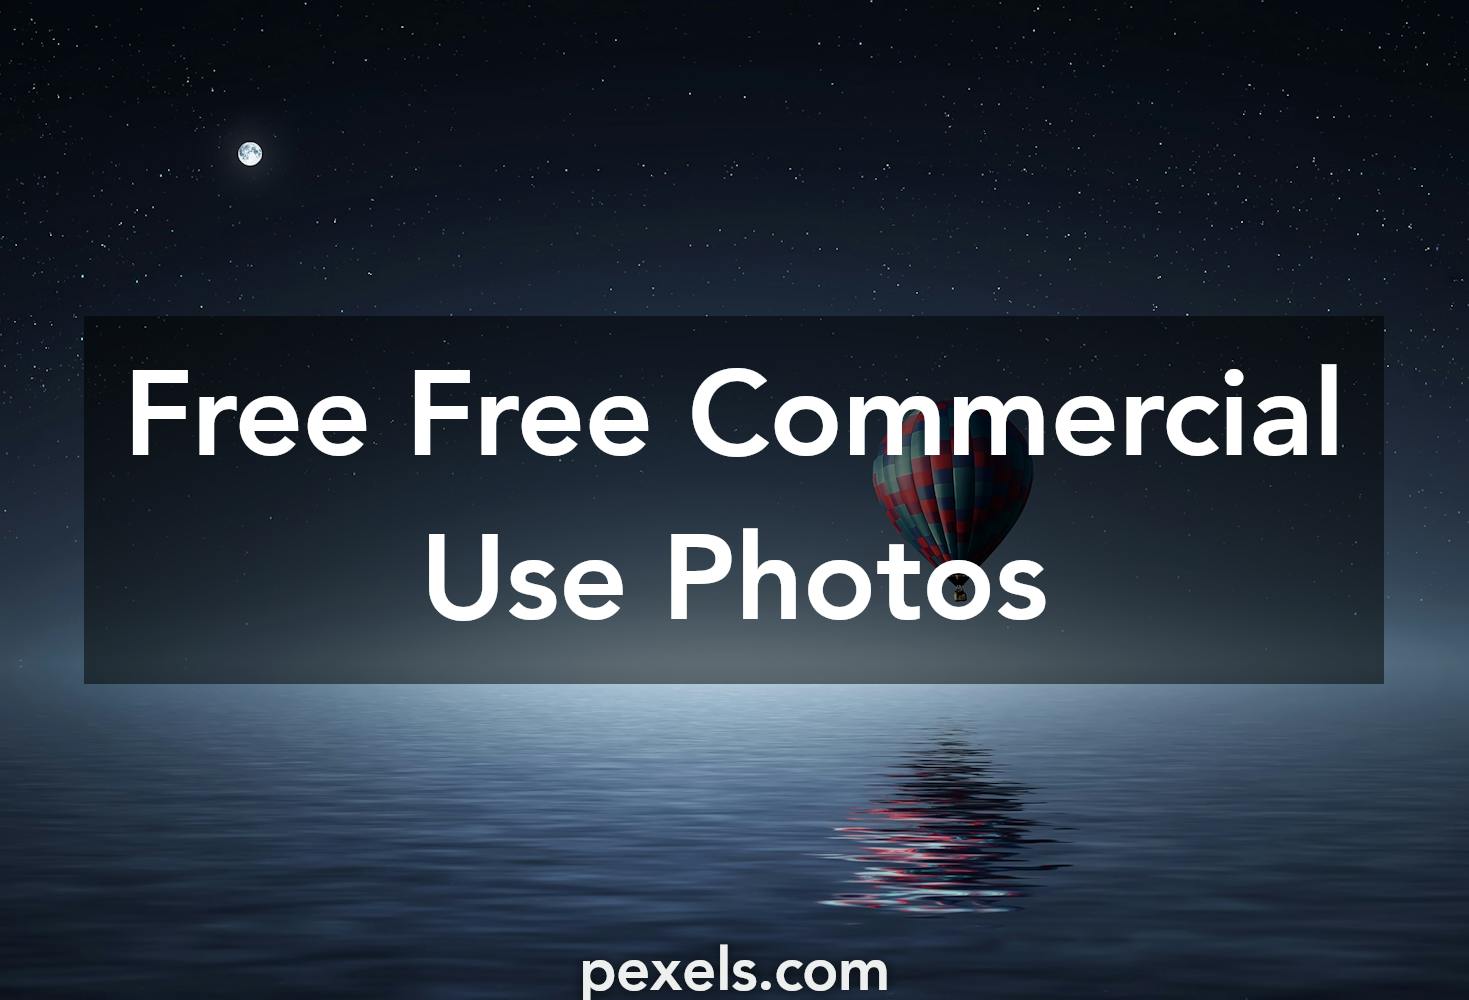 Free commercial photos